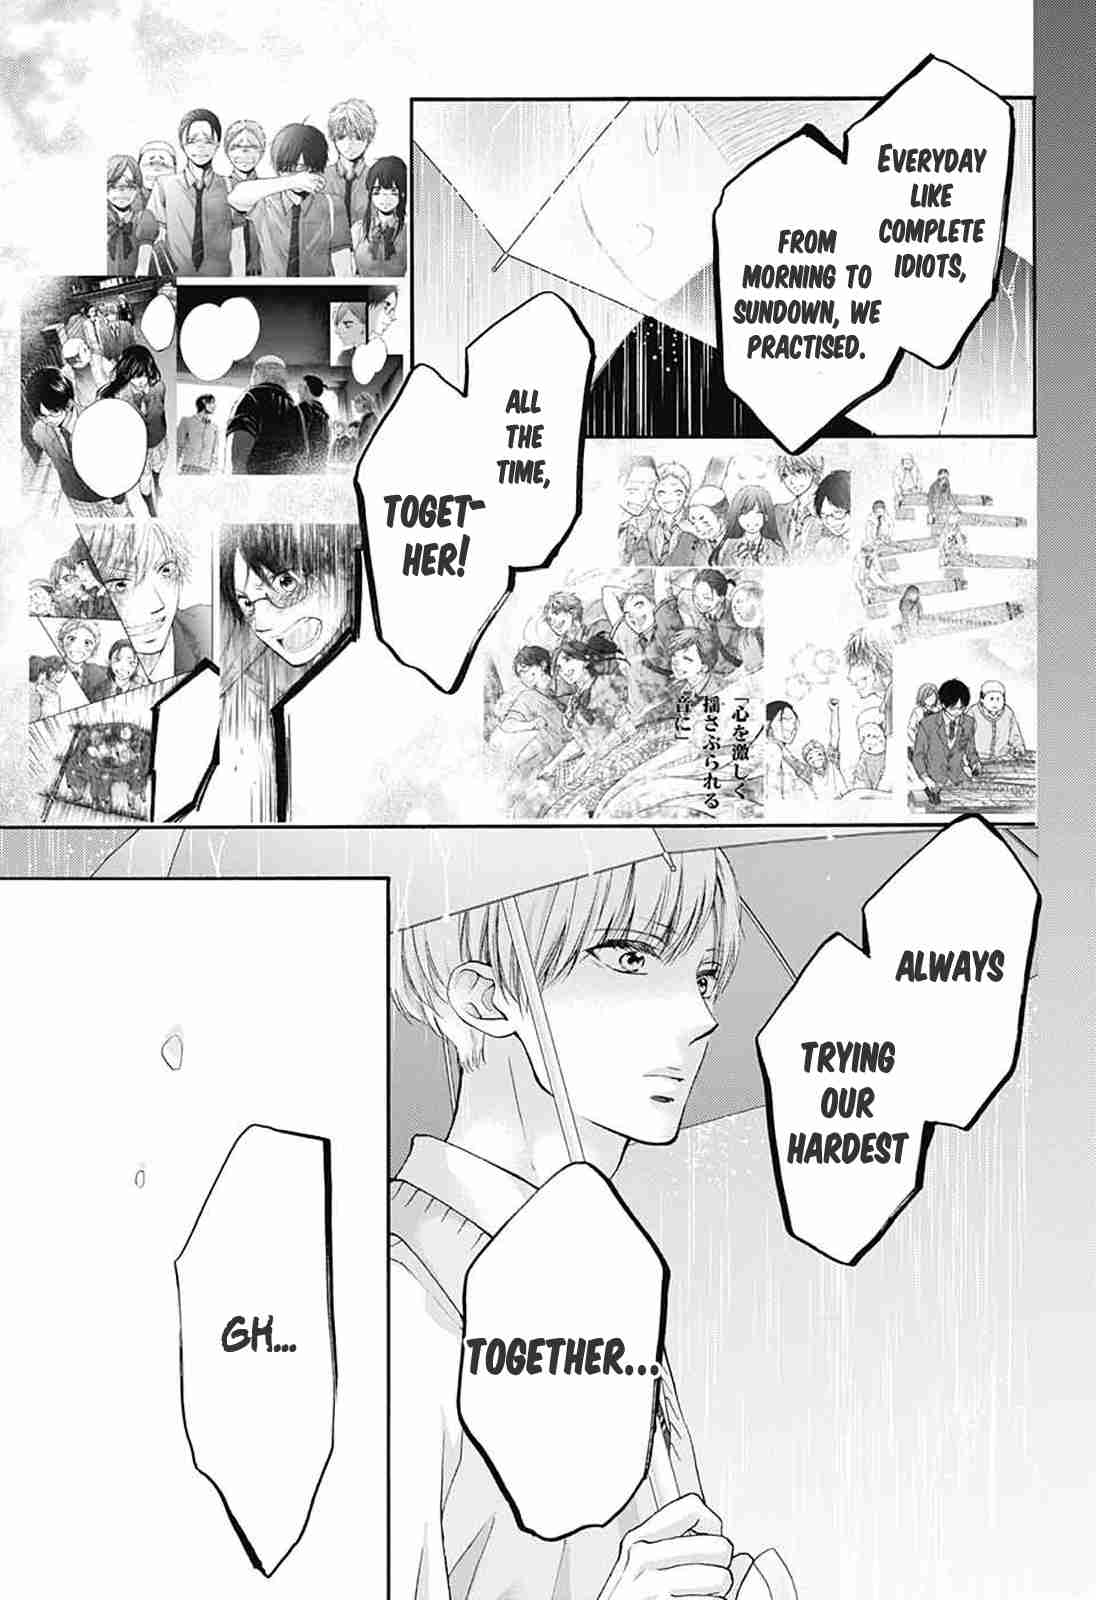 Kono Oto Tomare! Vol. 21 Ch. 80 The Loner and the Lonely